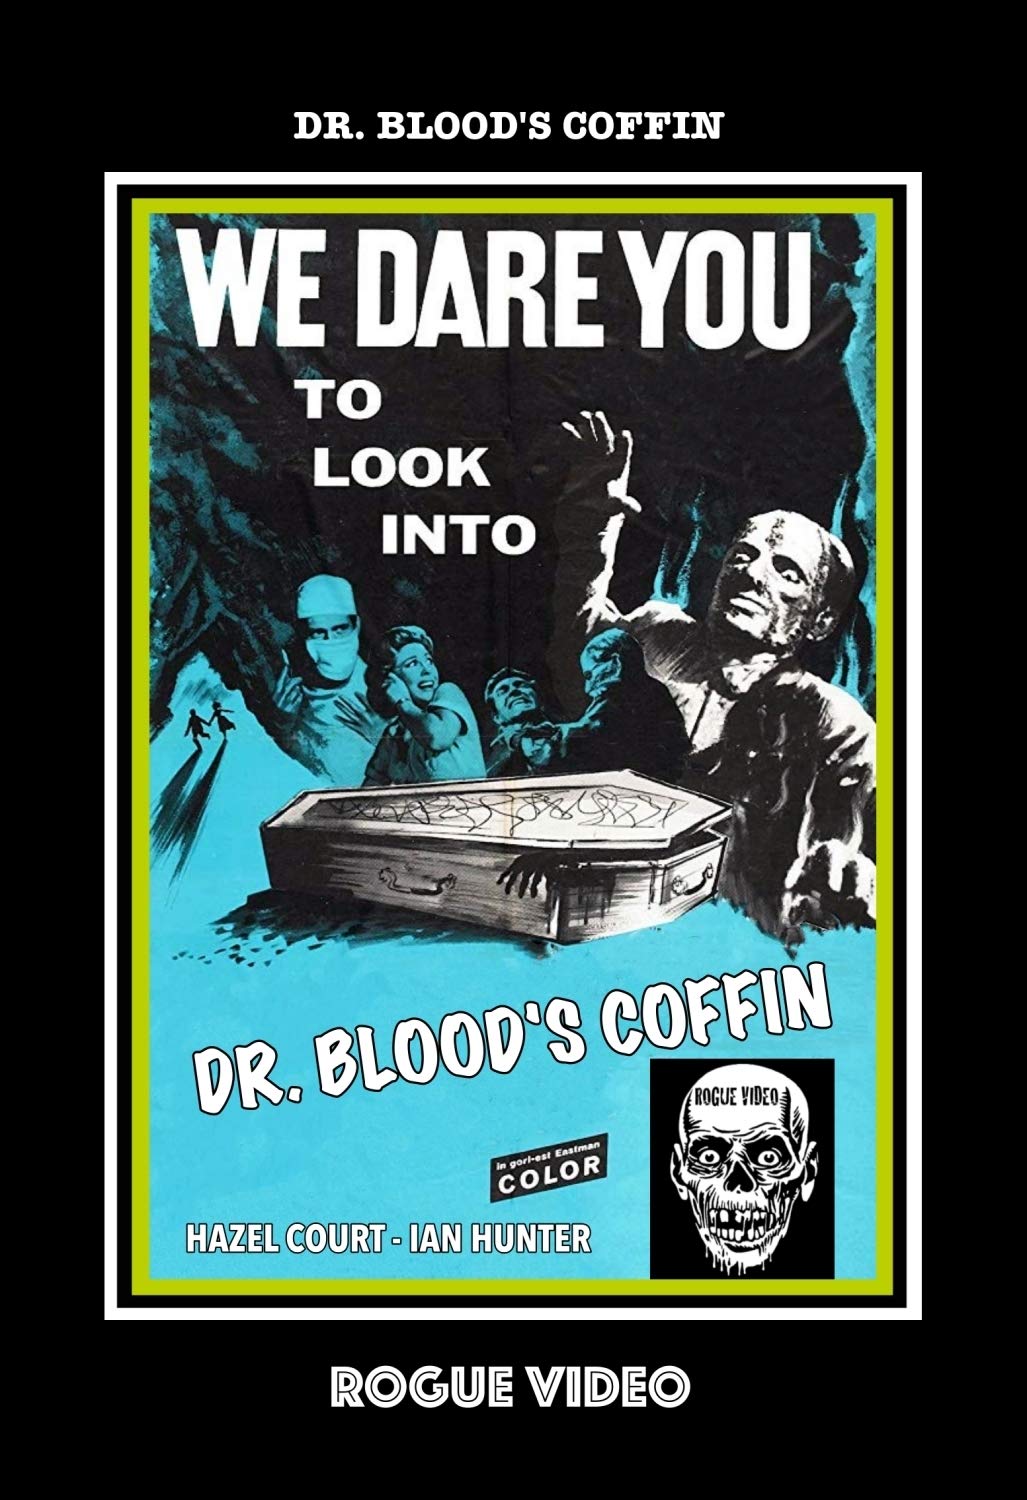 Dr. Blood's Coffin (1961) DVD by ROGUE VIDEO: cult films & fiction